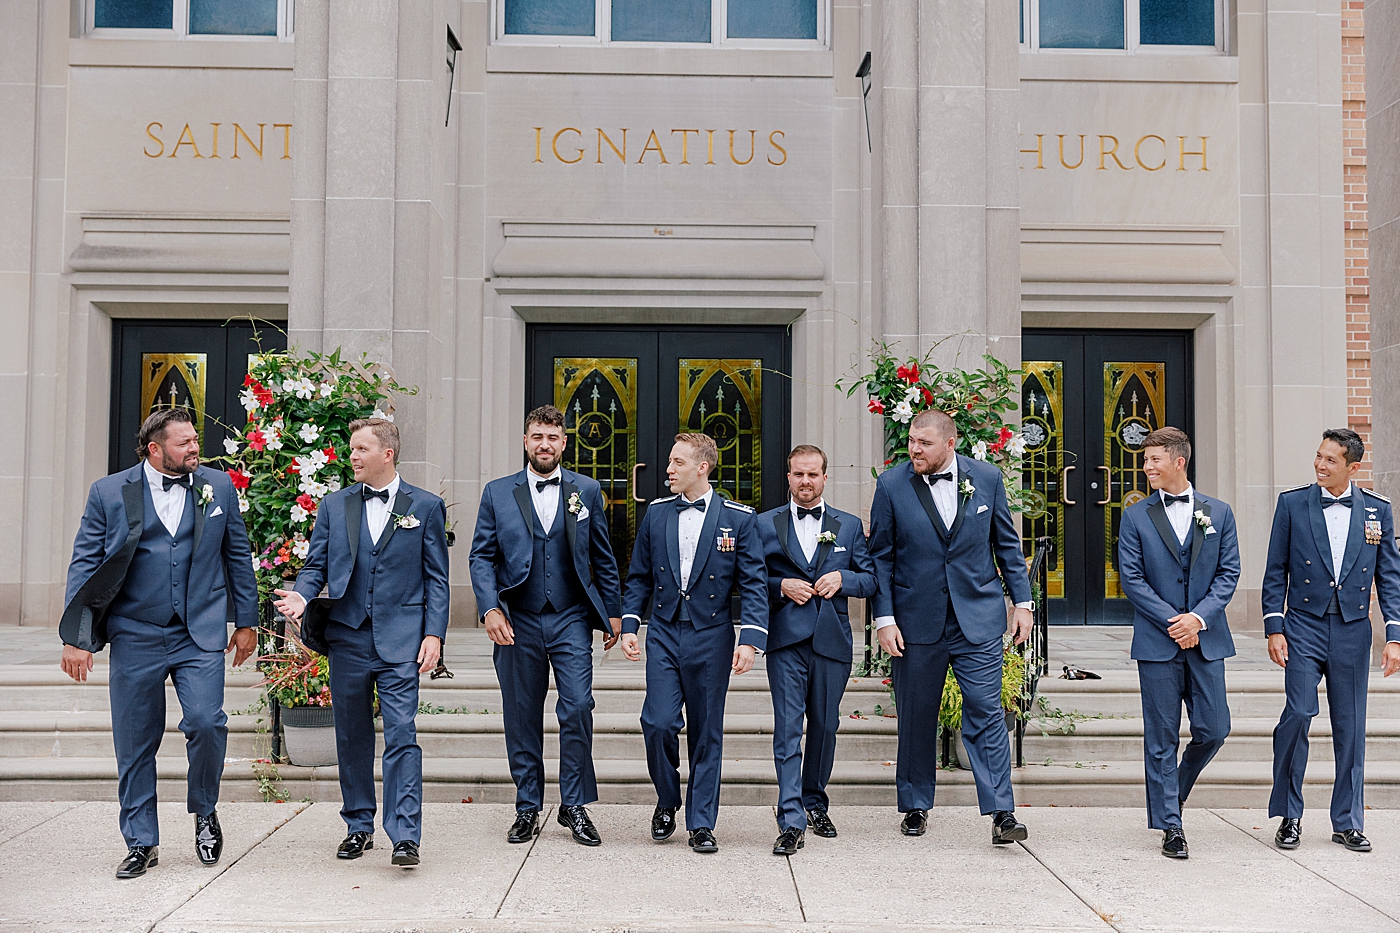 Groomsmen walking in a line | Image by Hope Helmuth Photography